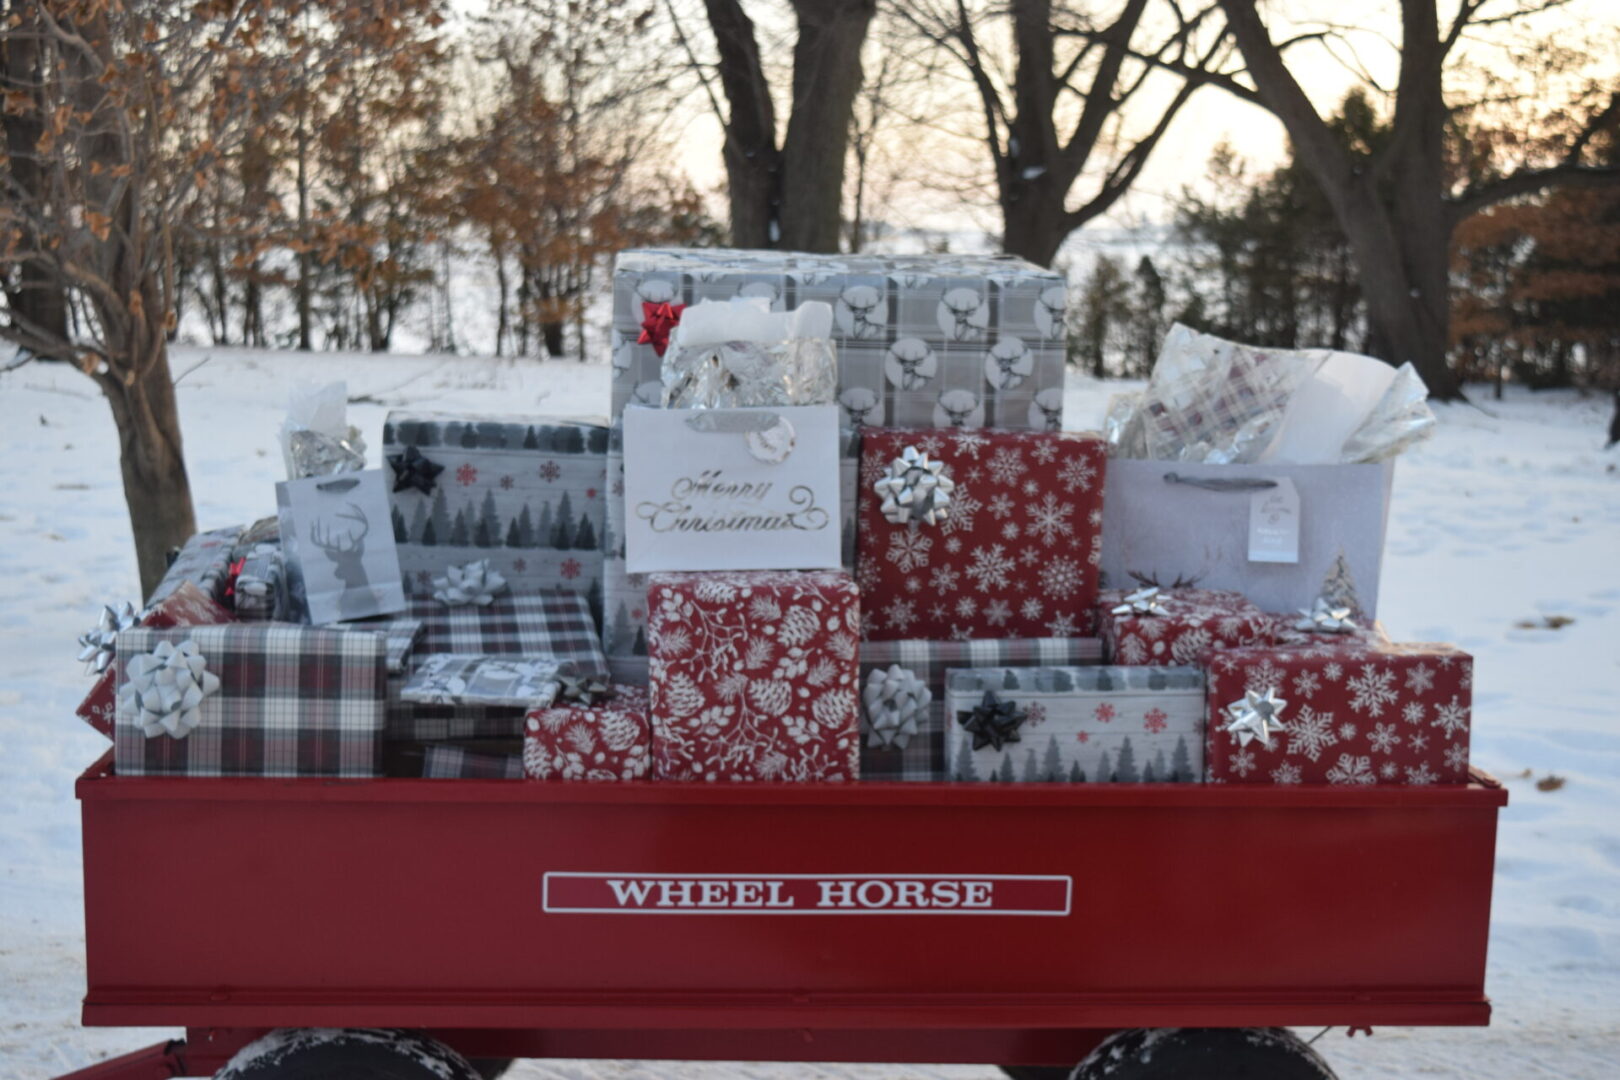 A red wagon full of christmas presents on a snowy day displayed in a gallery.